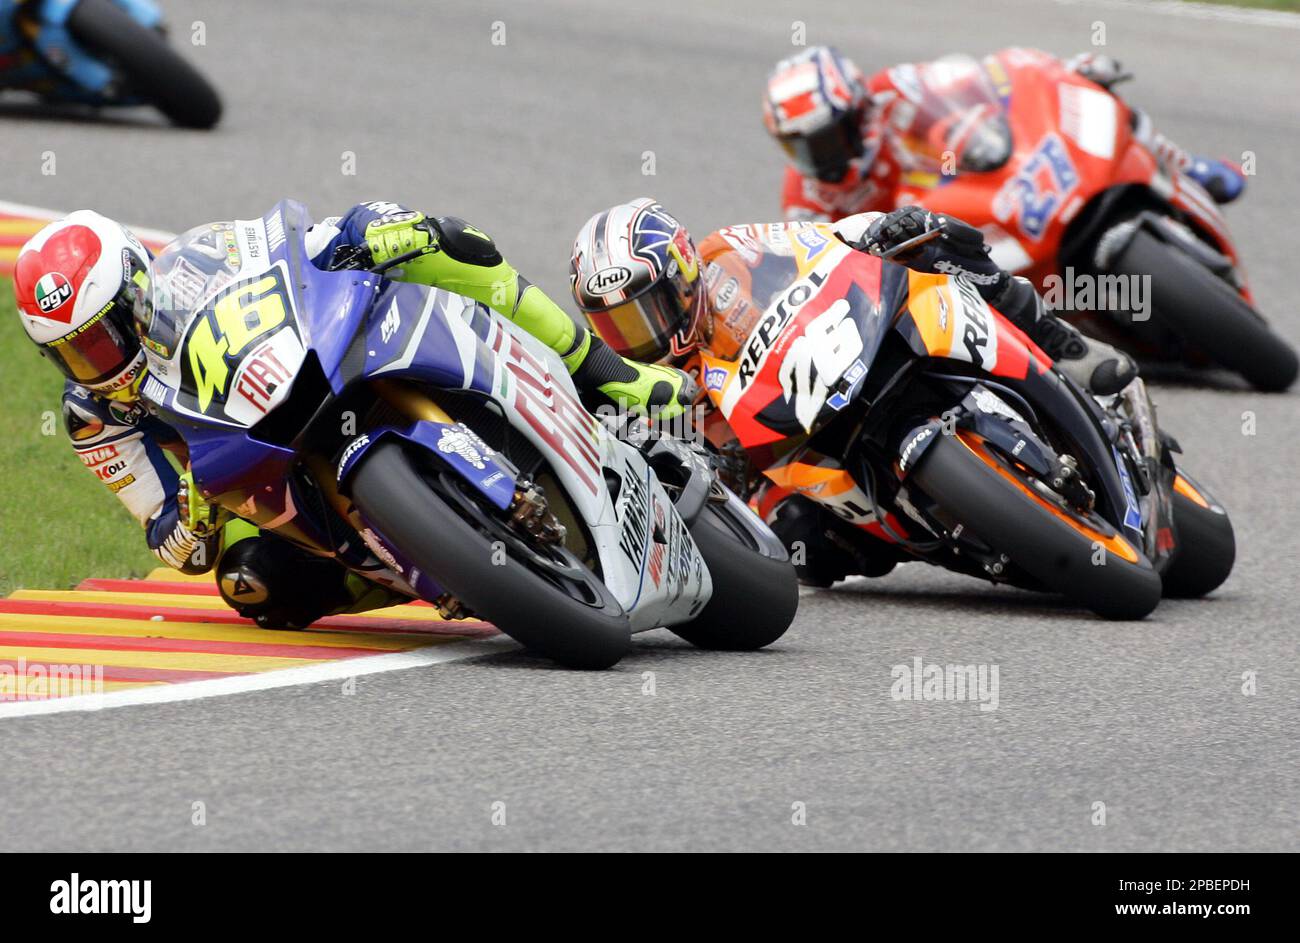 Yamaha driver Valentino Rossi, left, of Italy, pursued by Honda's Dani  Pedrosa n. 26 of Spain, and Ducati's Casey Stoner n. 27 of Australia,  during the Italian MotoGP, at the Mugello circuit,